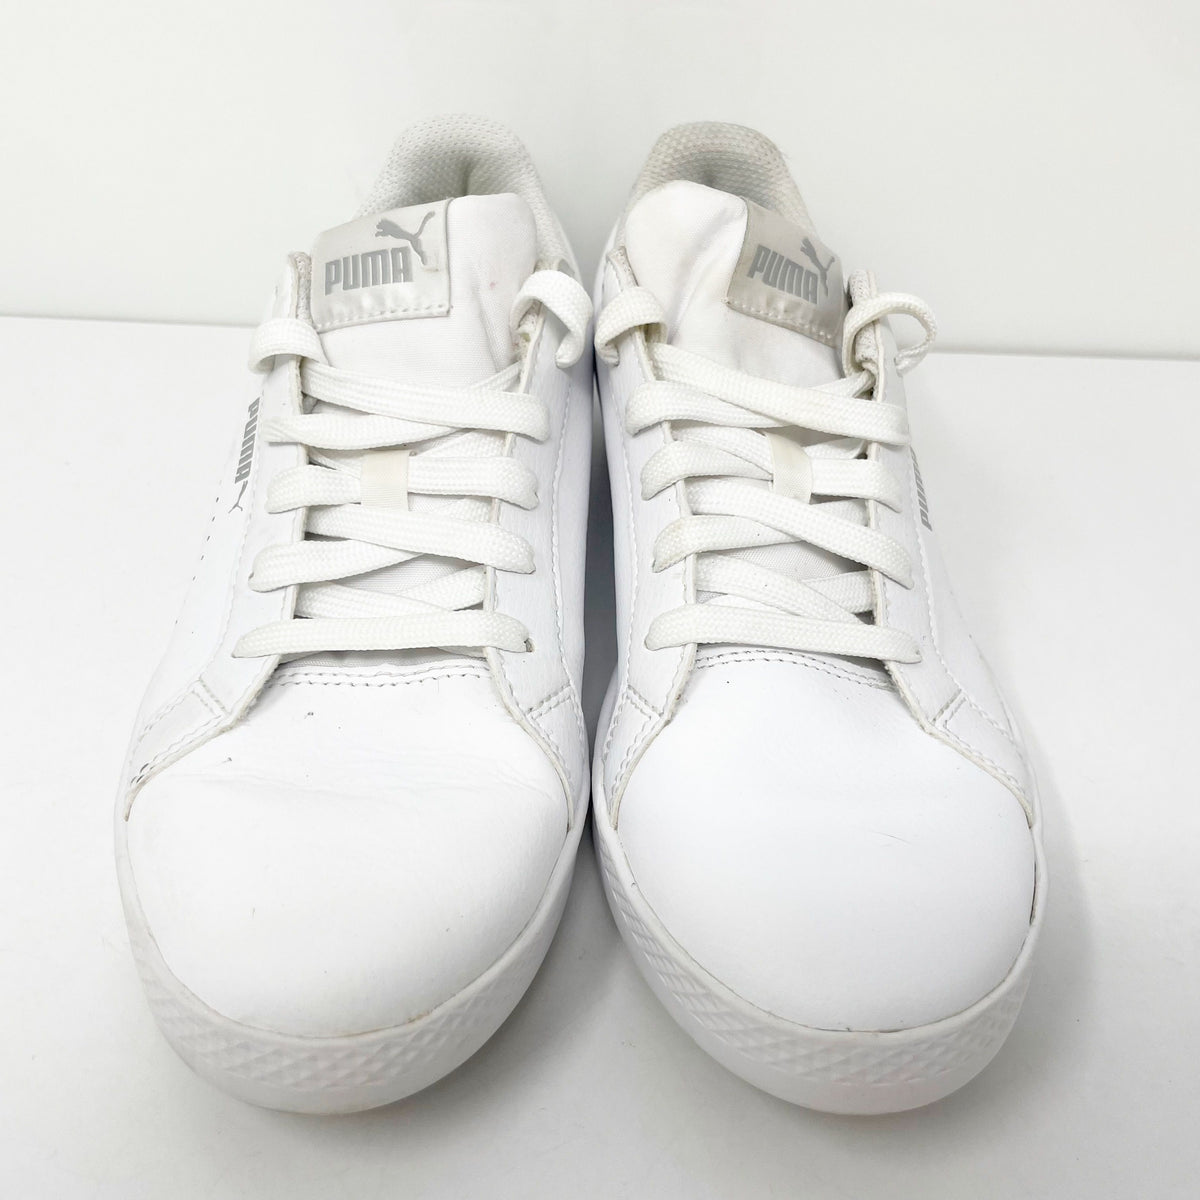 Puma Womens Smash V2 365208-01 White Casual Shoes Sneakers Size 9.5